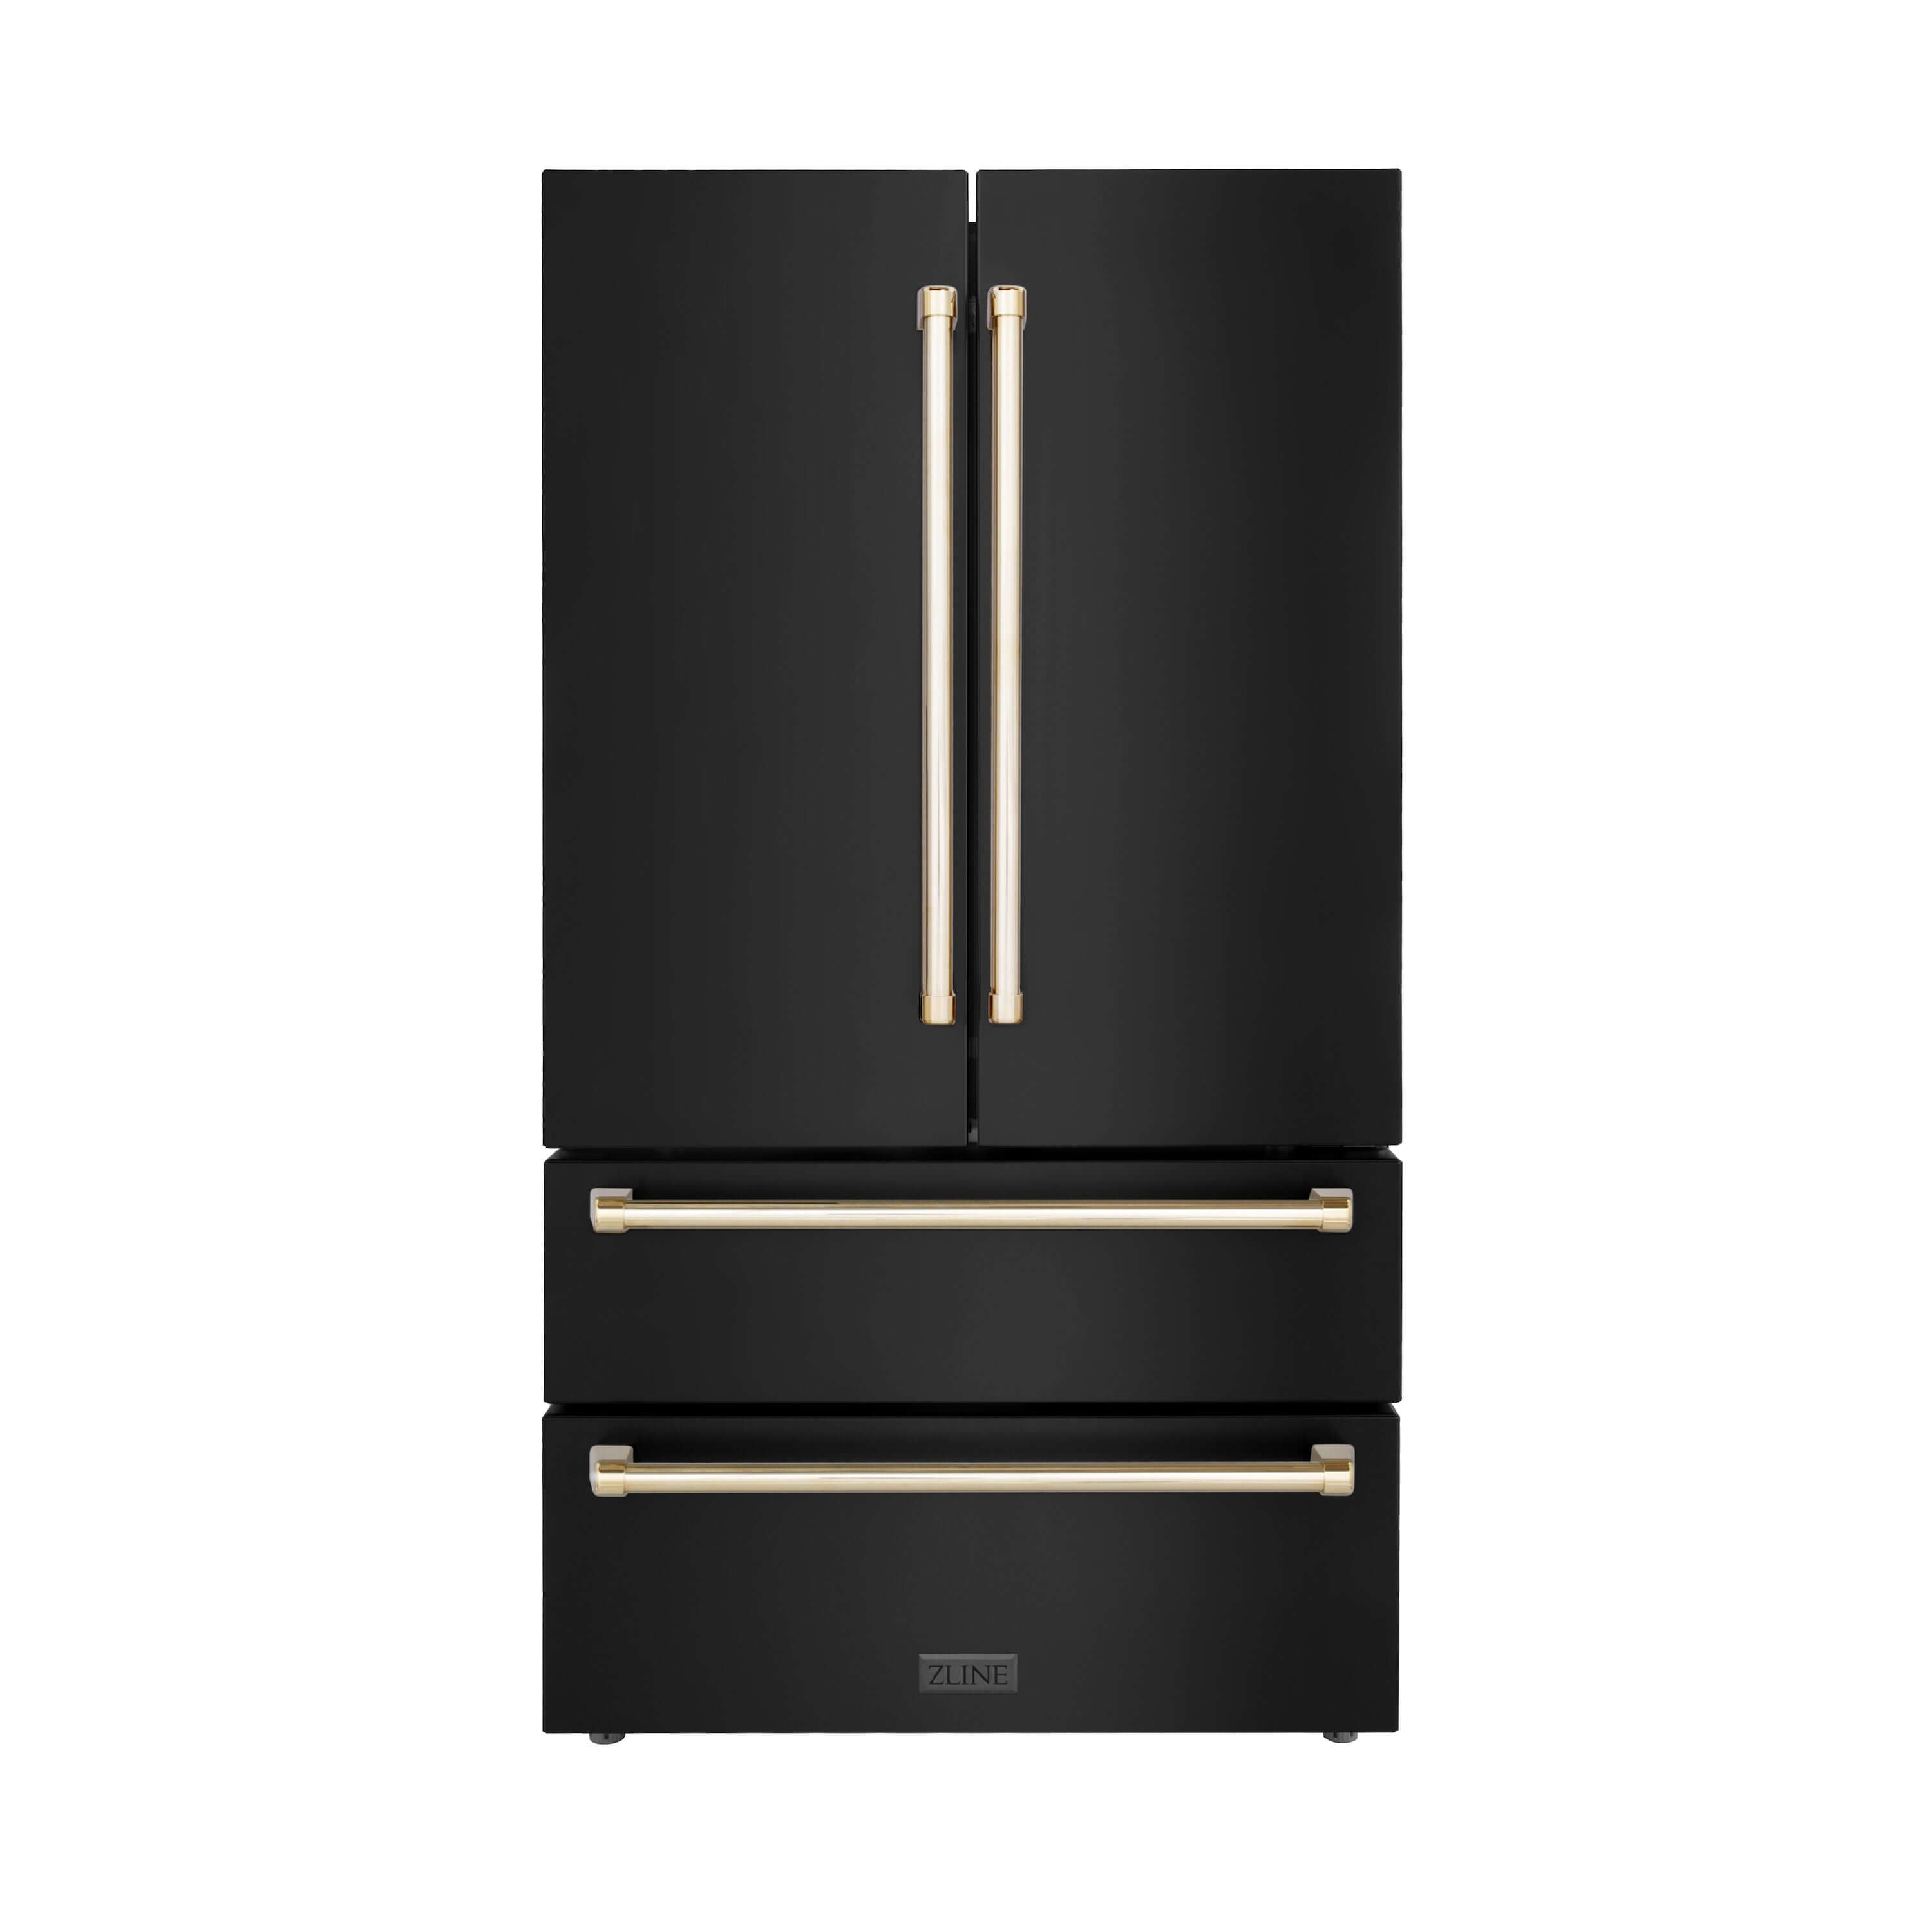 ZLINE Autograph Edition 48 in. Kitchen Package with Black Stainless Steel Dual Fuel Range, Range Hood, Dishwasher and Refrigeration Including External Water Dispenser with Polished Gold Accents (4AKPR-RABRHDWV48-G) refrigerator front, closed.